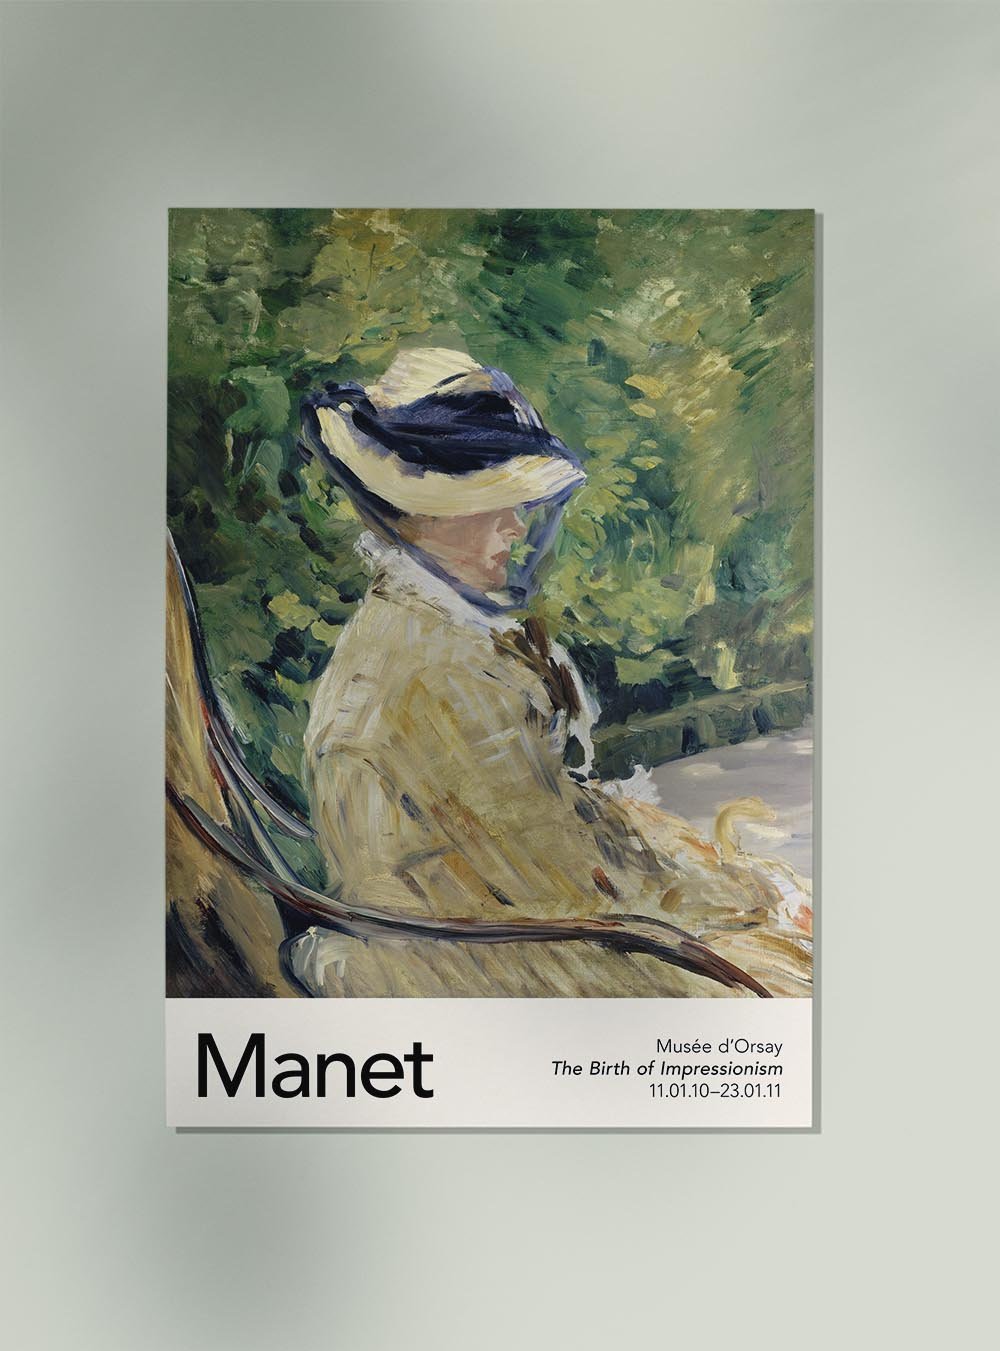 Madame Manet by Manet Exhibition Poster